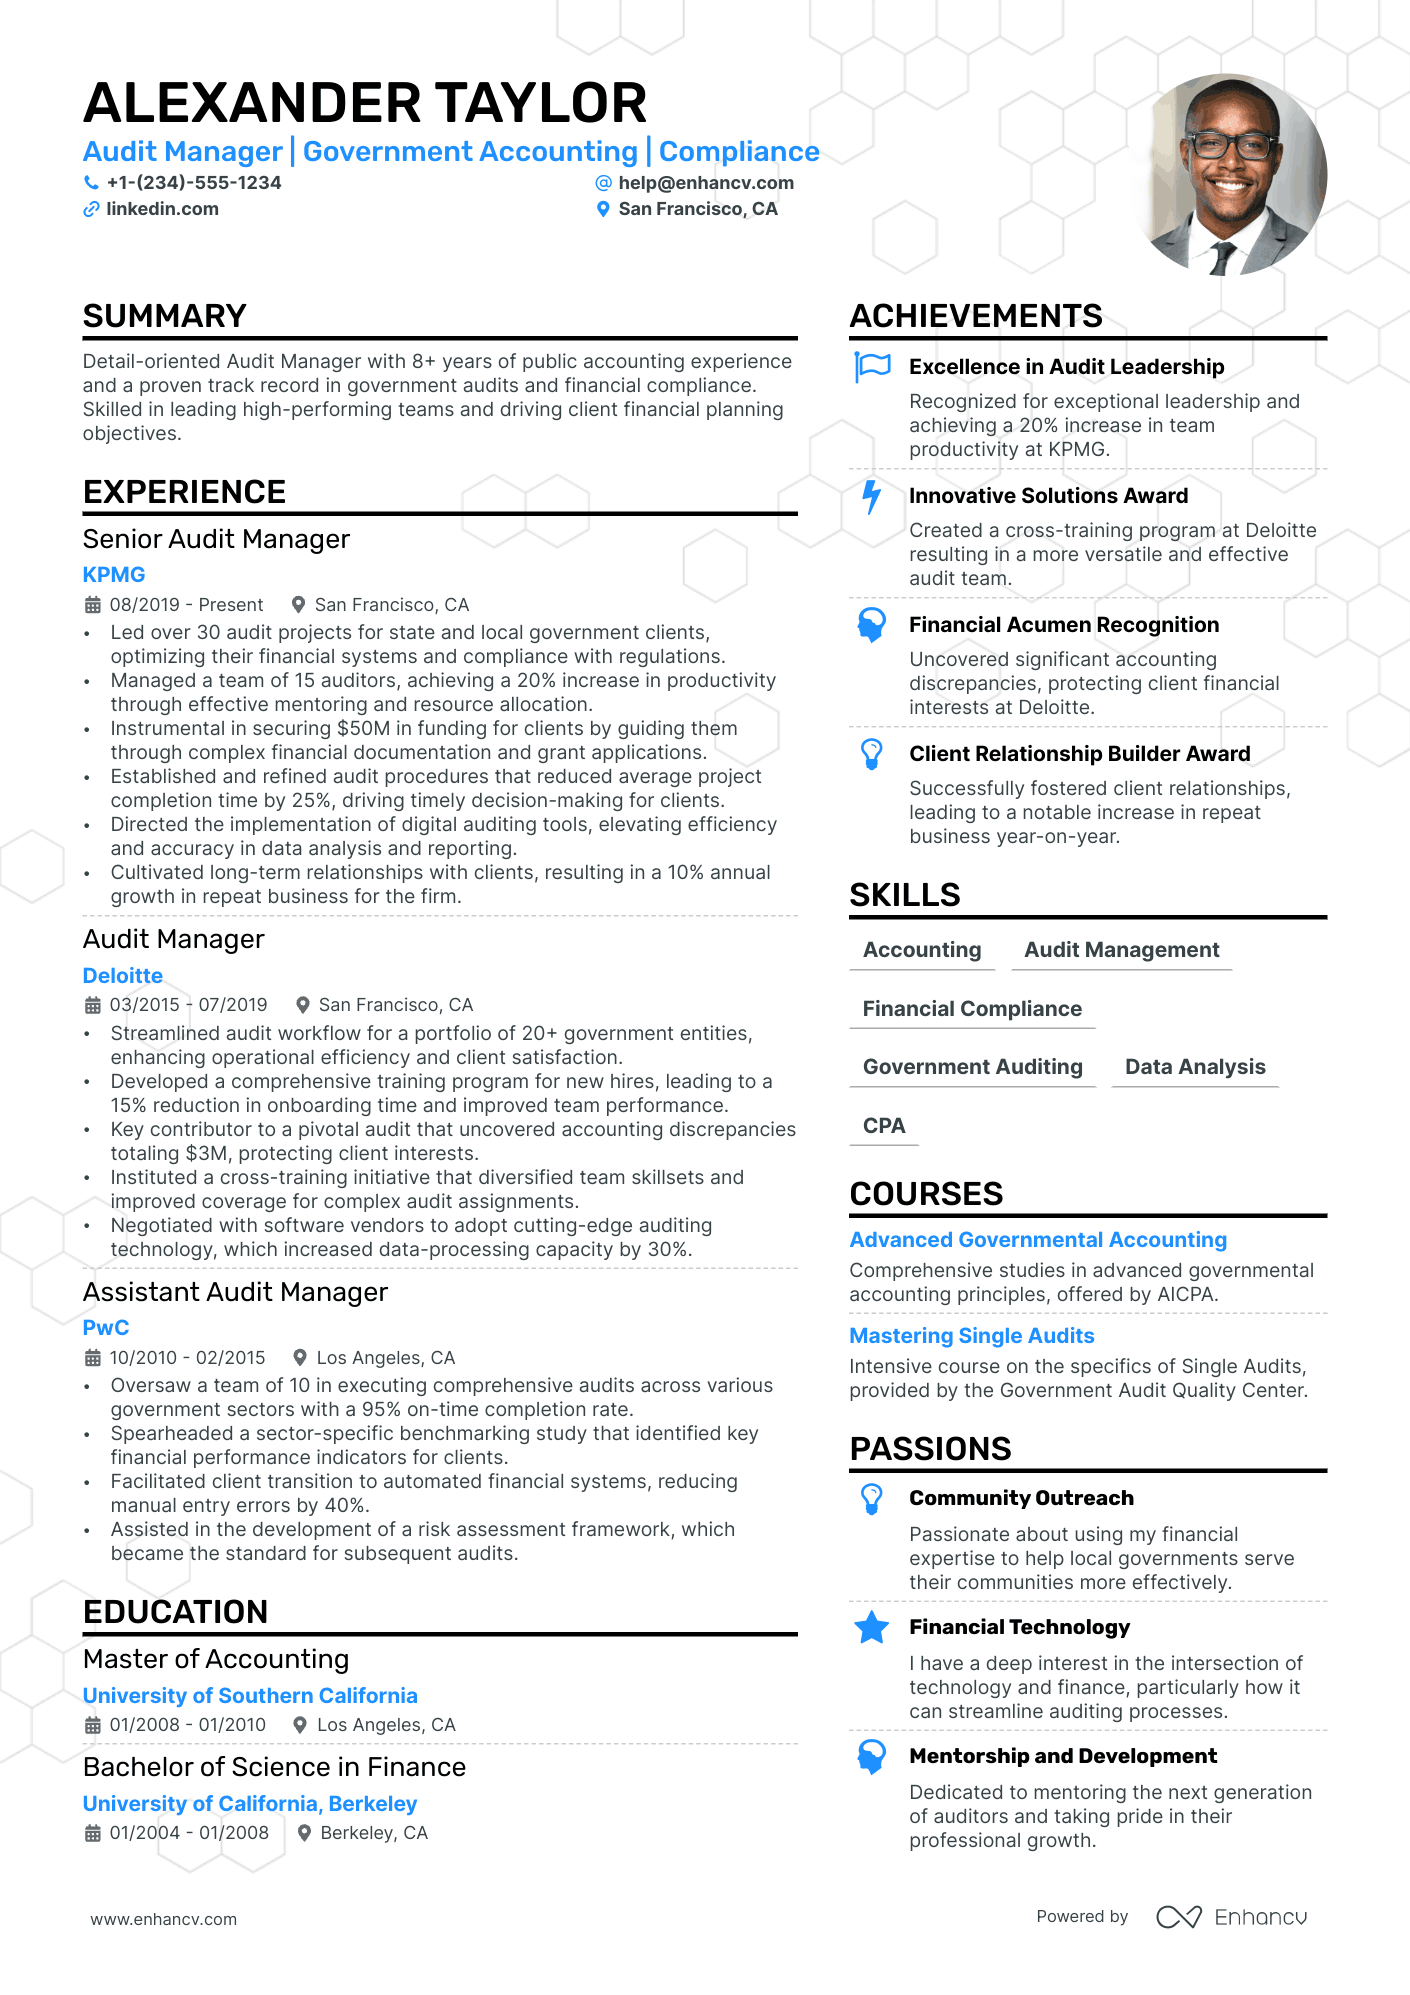 Audit Director resume example